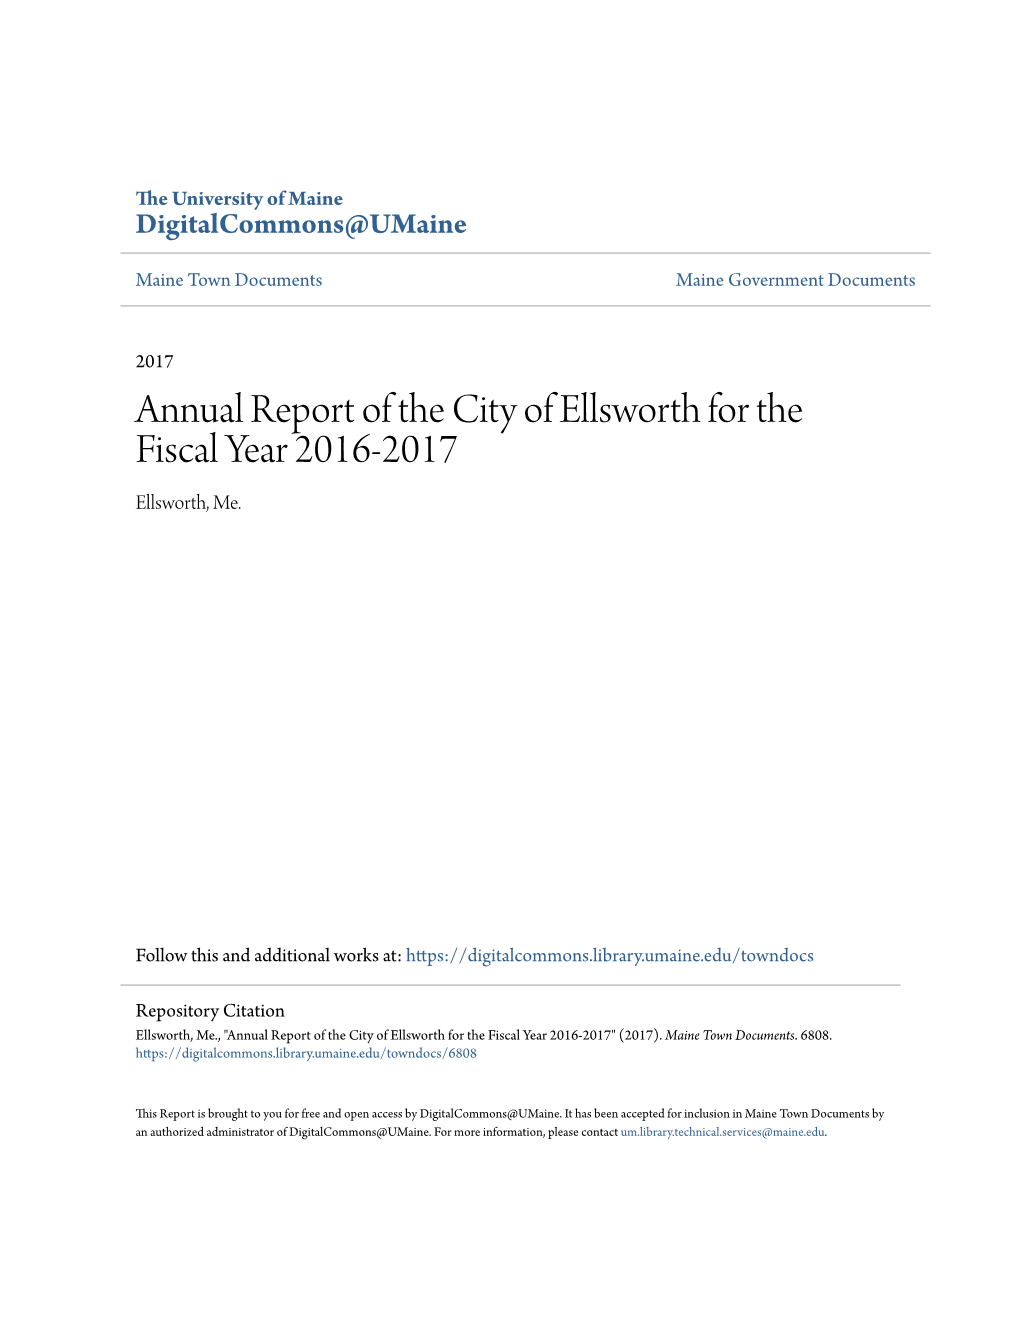 Annual Report of the City of Ellsworth for the Fiscal Year 2016-2017 Ellsworth, Me